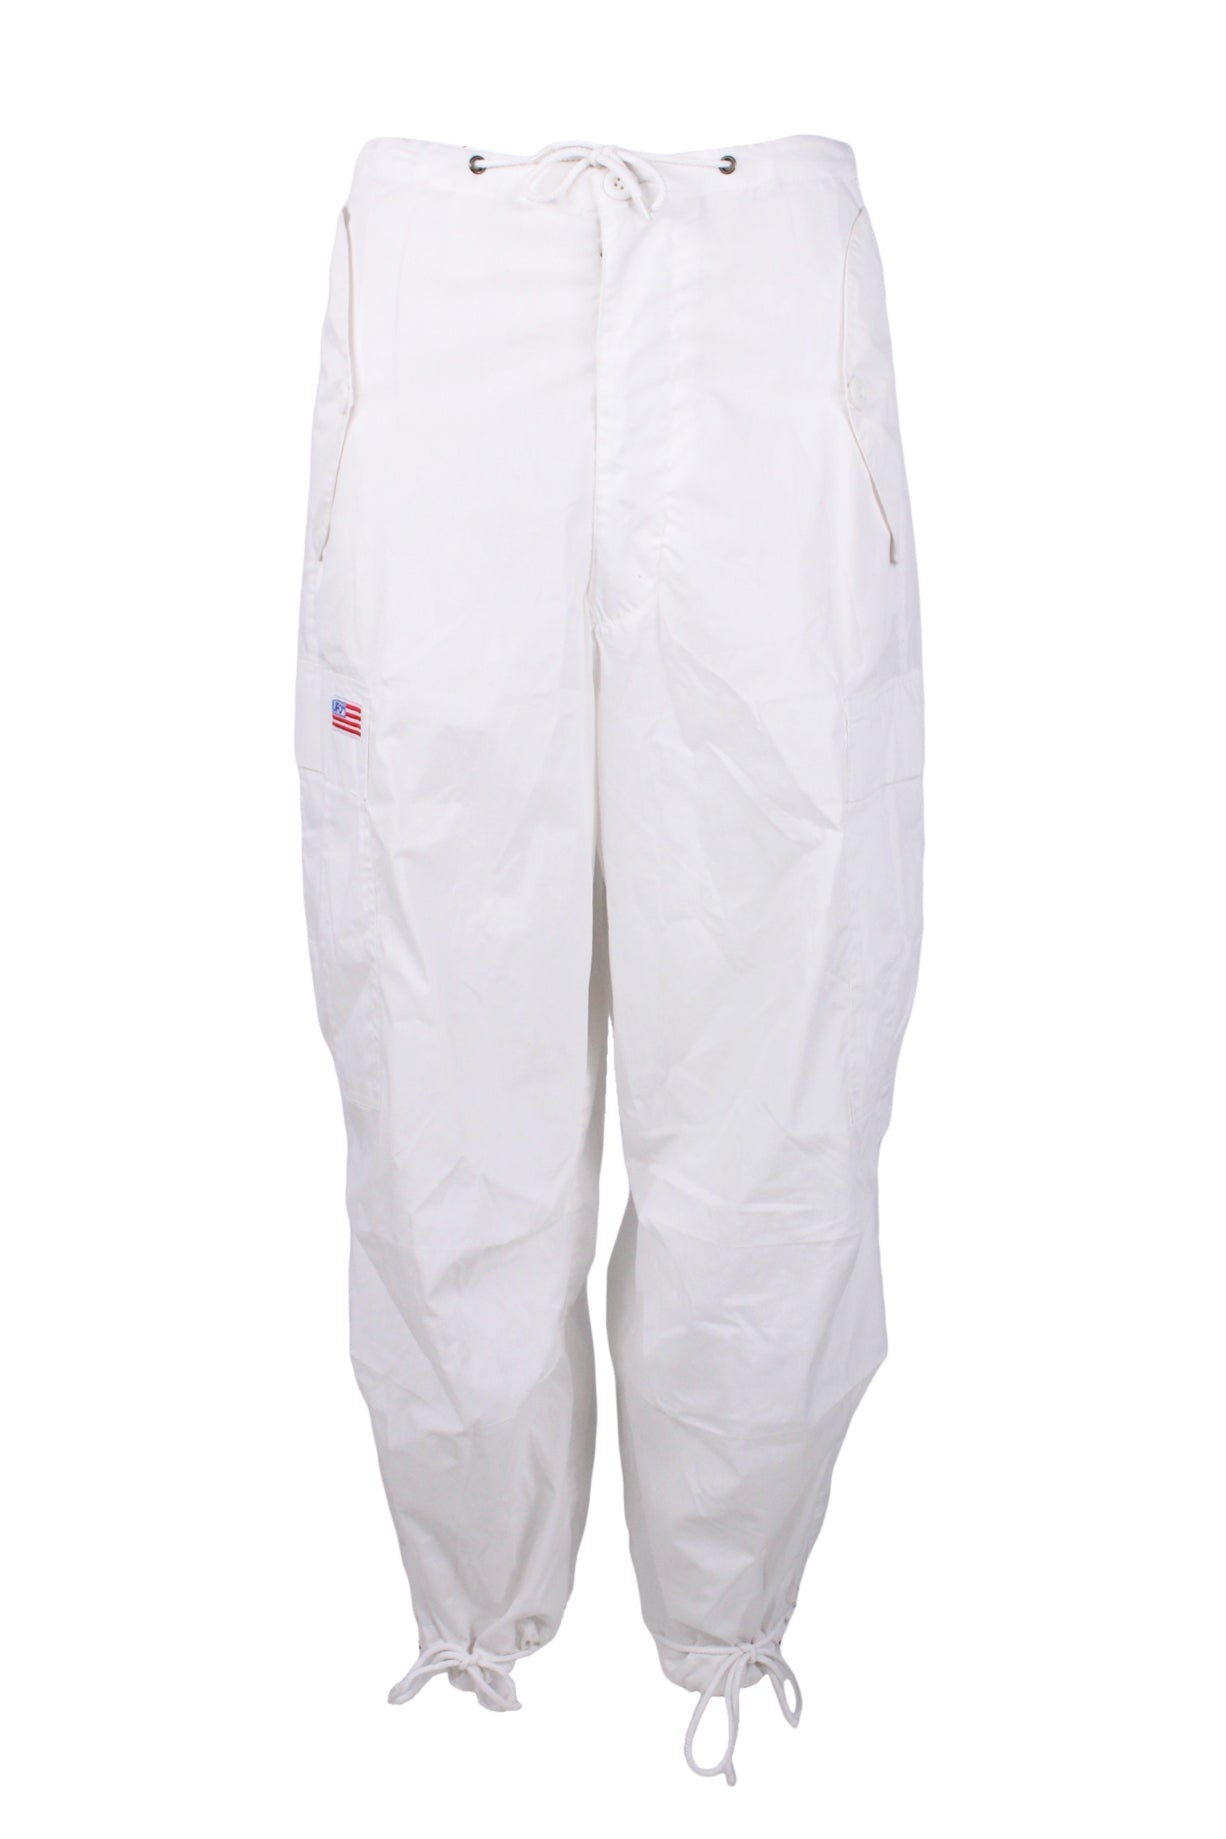 description: vintage ufo white cargo pants. features button with drawstring closure at waist, zip flu, drawstring detailing at bottom hem, and multiple pockets throughout. 